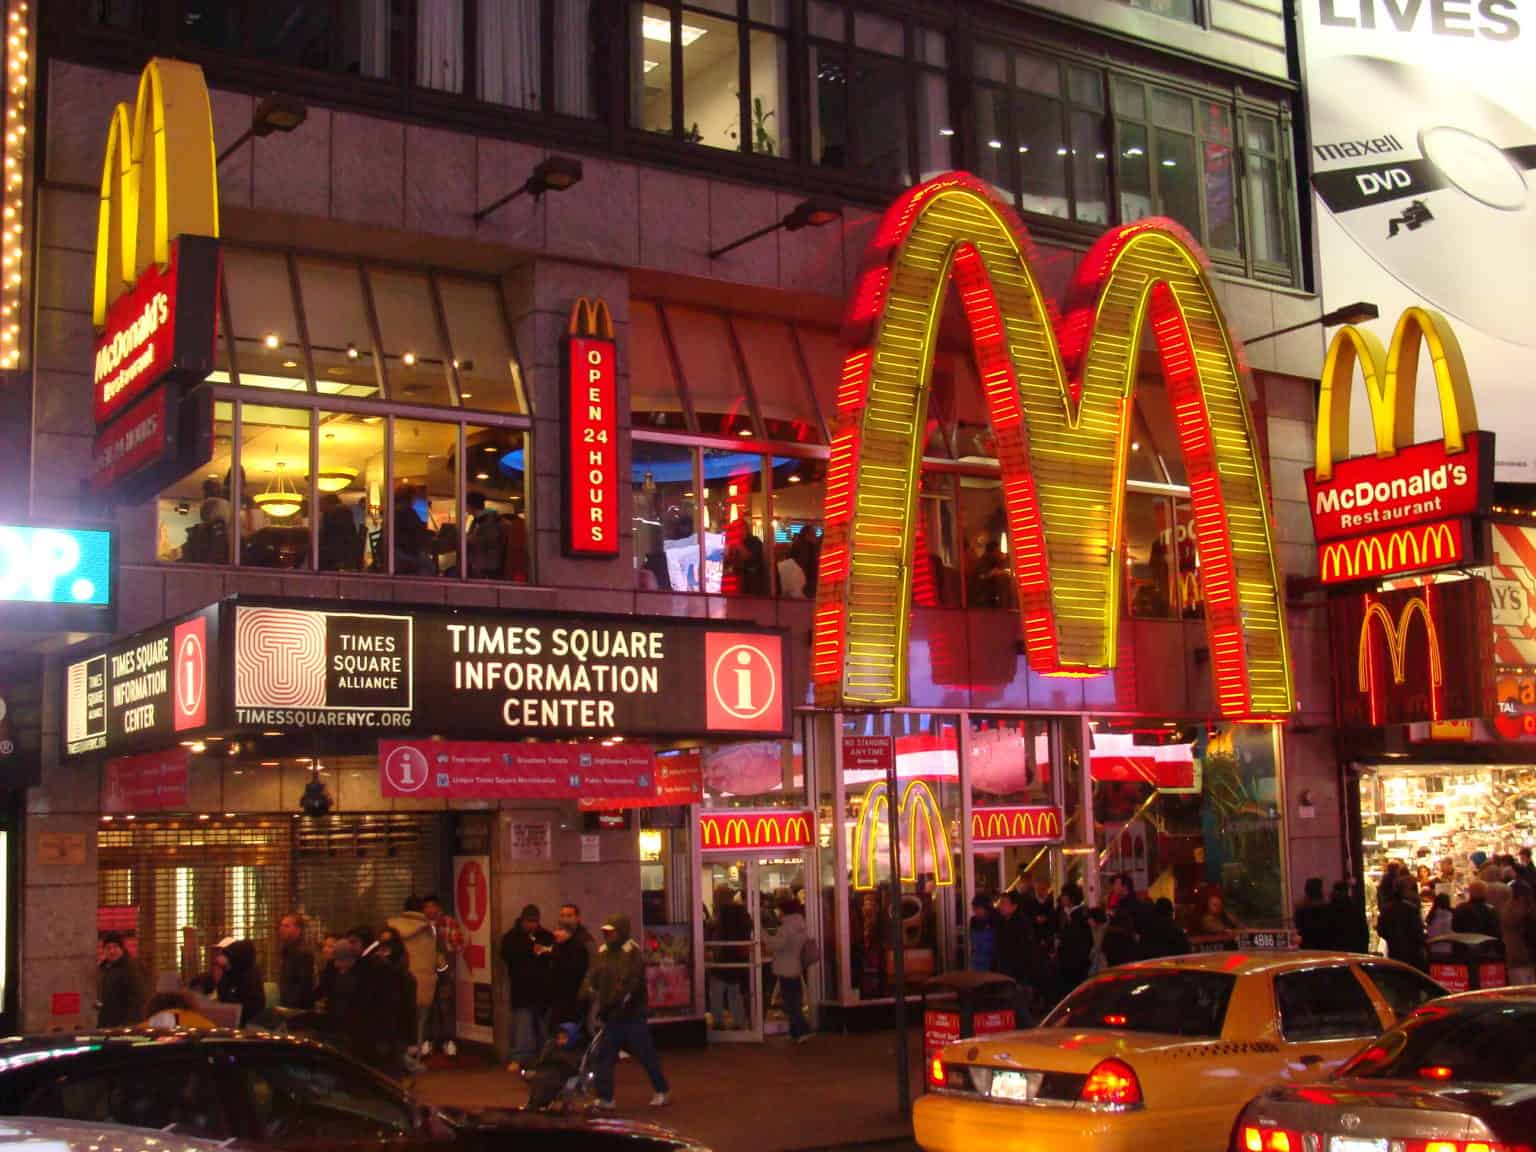 How Much Does McDonald's Pay Its Employees?